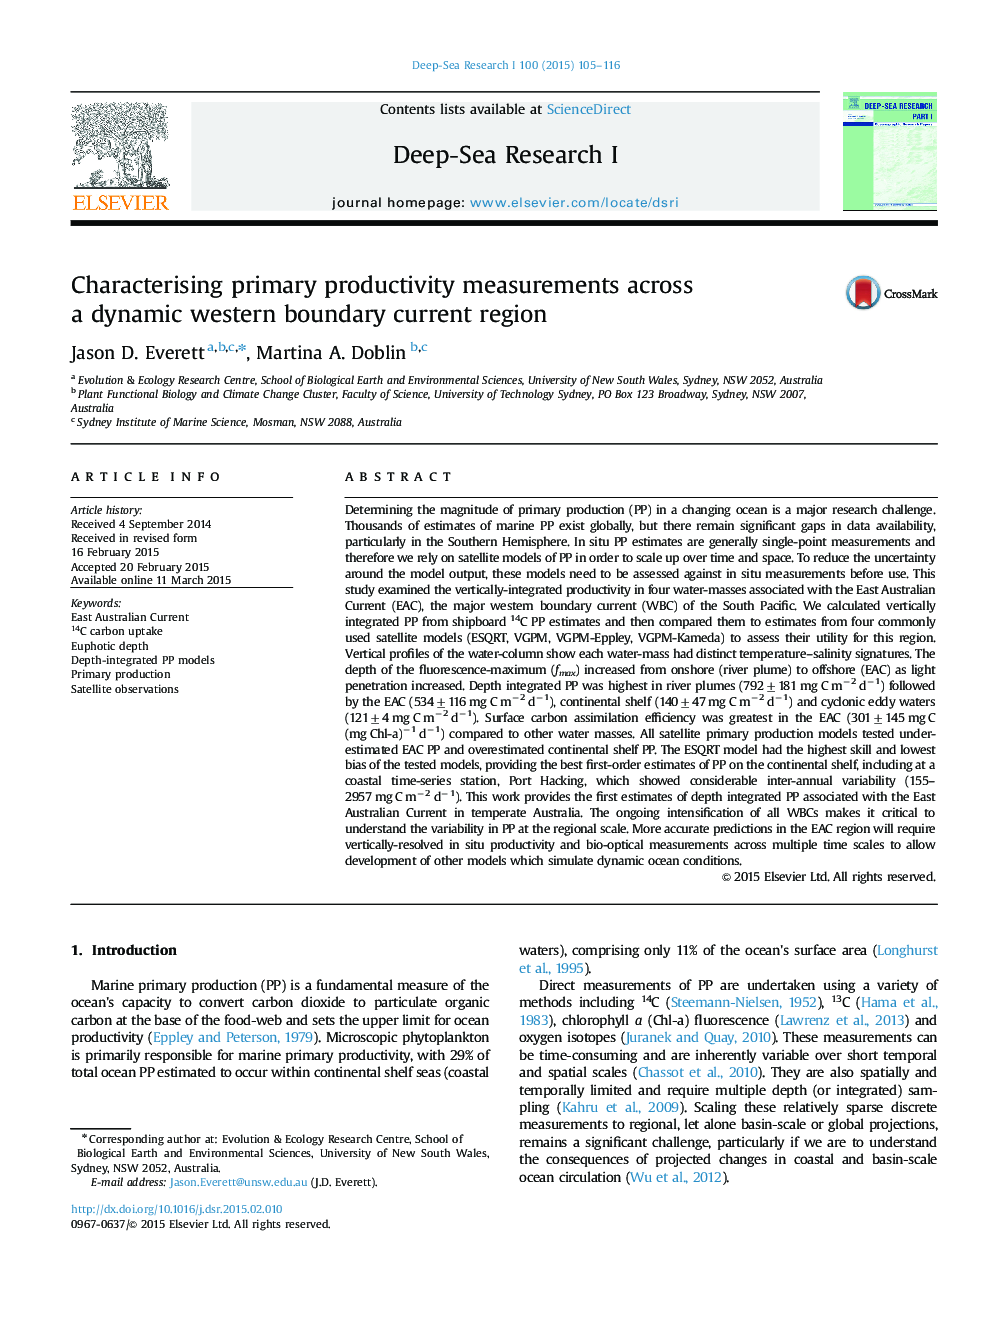 Characterising primary productivity measurements across a dynamic western boundary current region